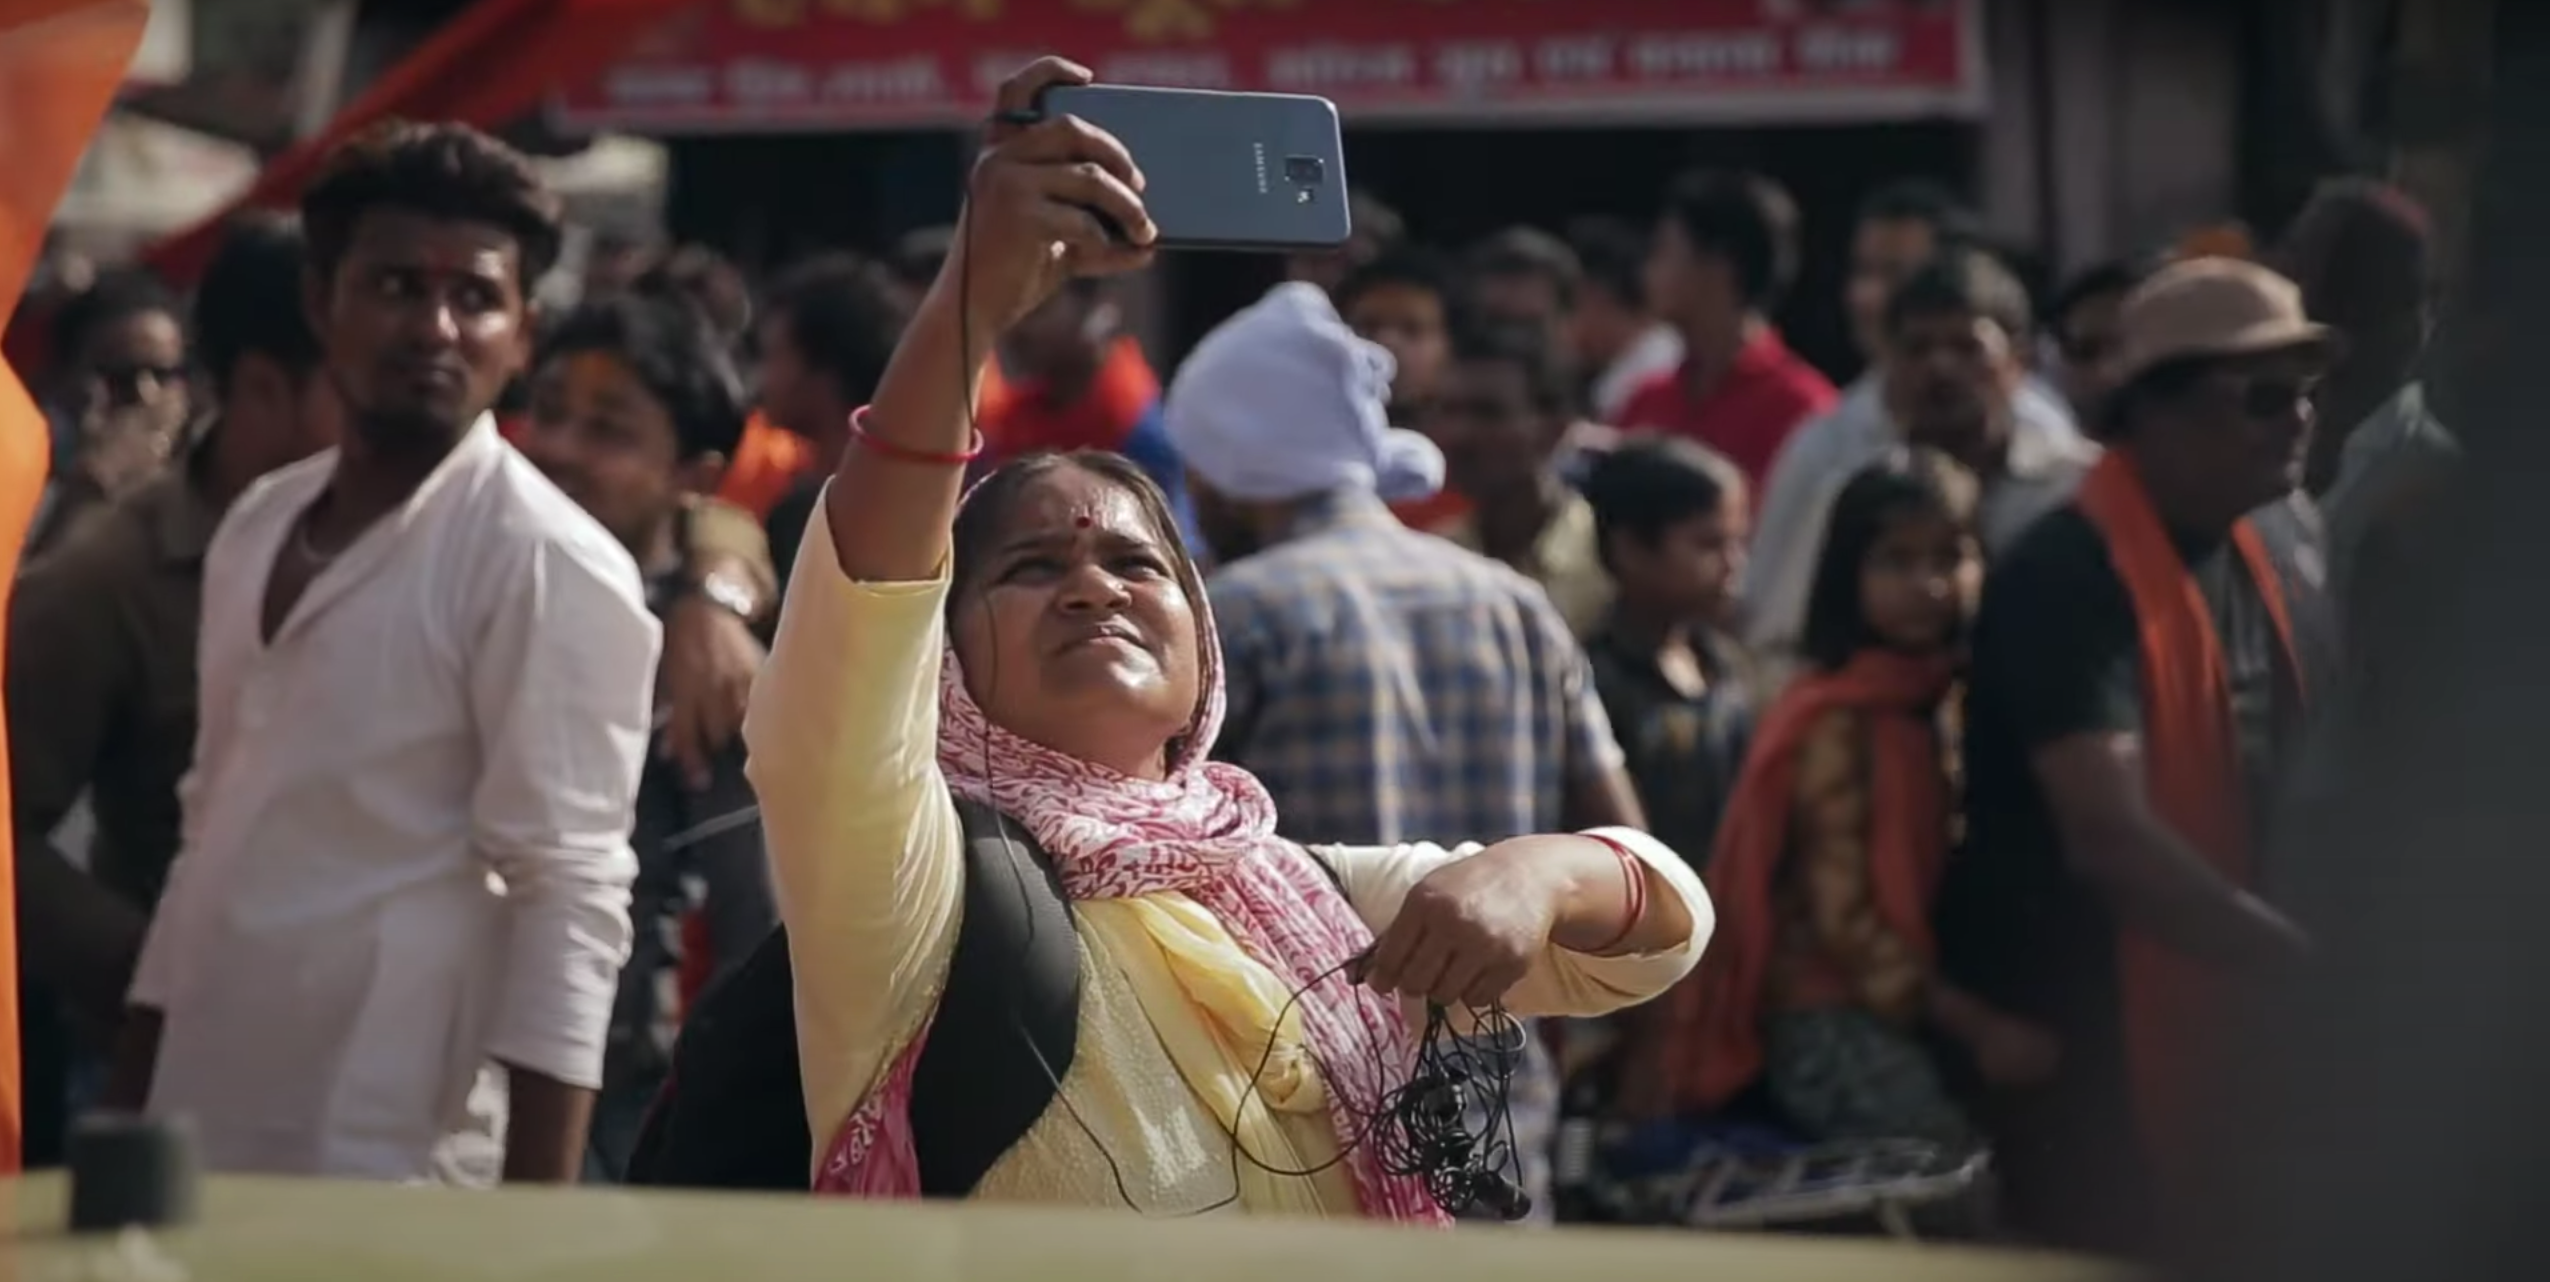 Image of a Dalit woman journalist from Khabar Lahariya reporting the news with her smartphone